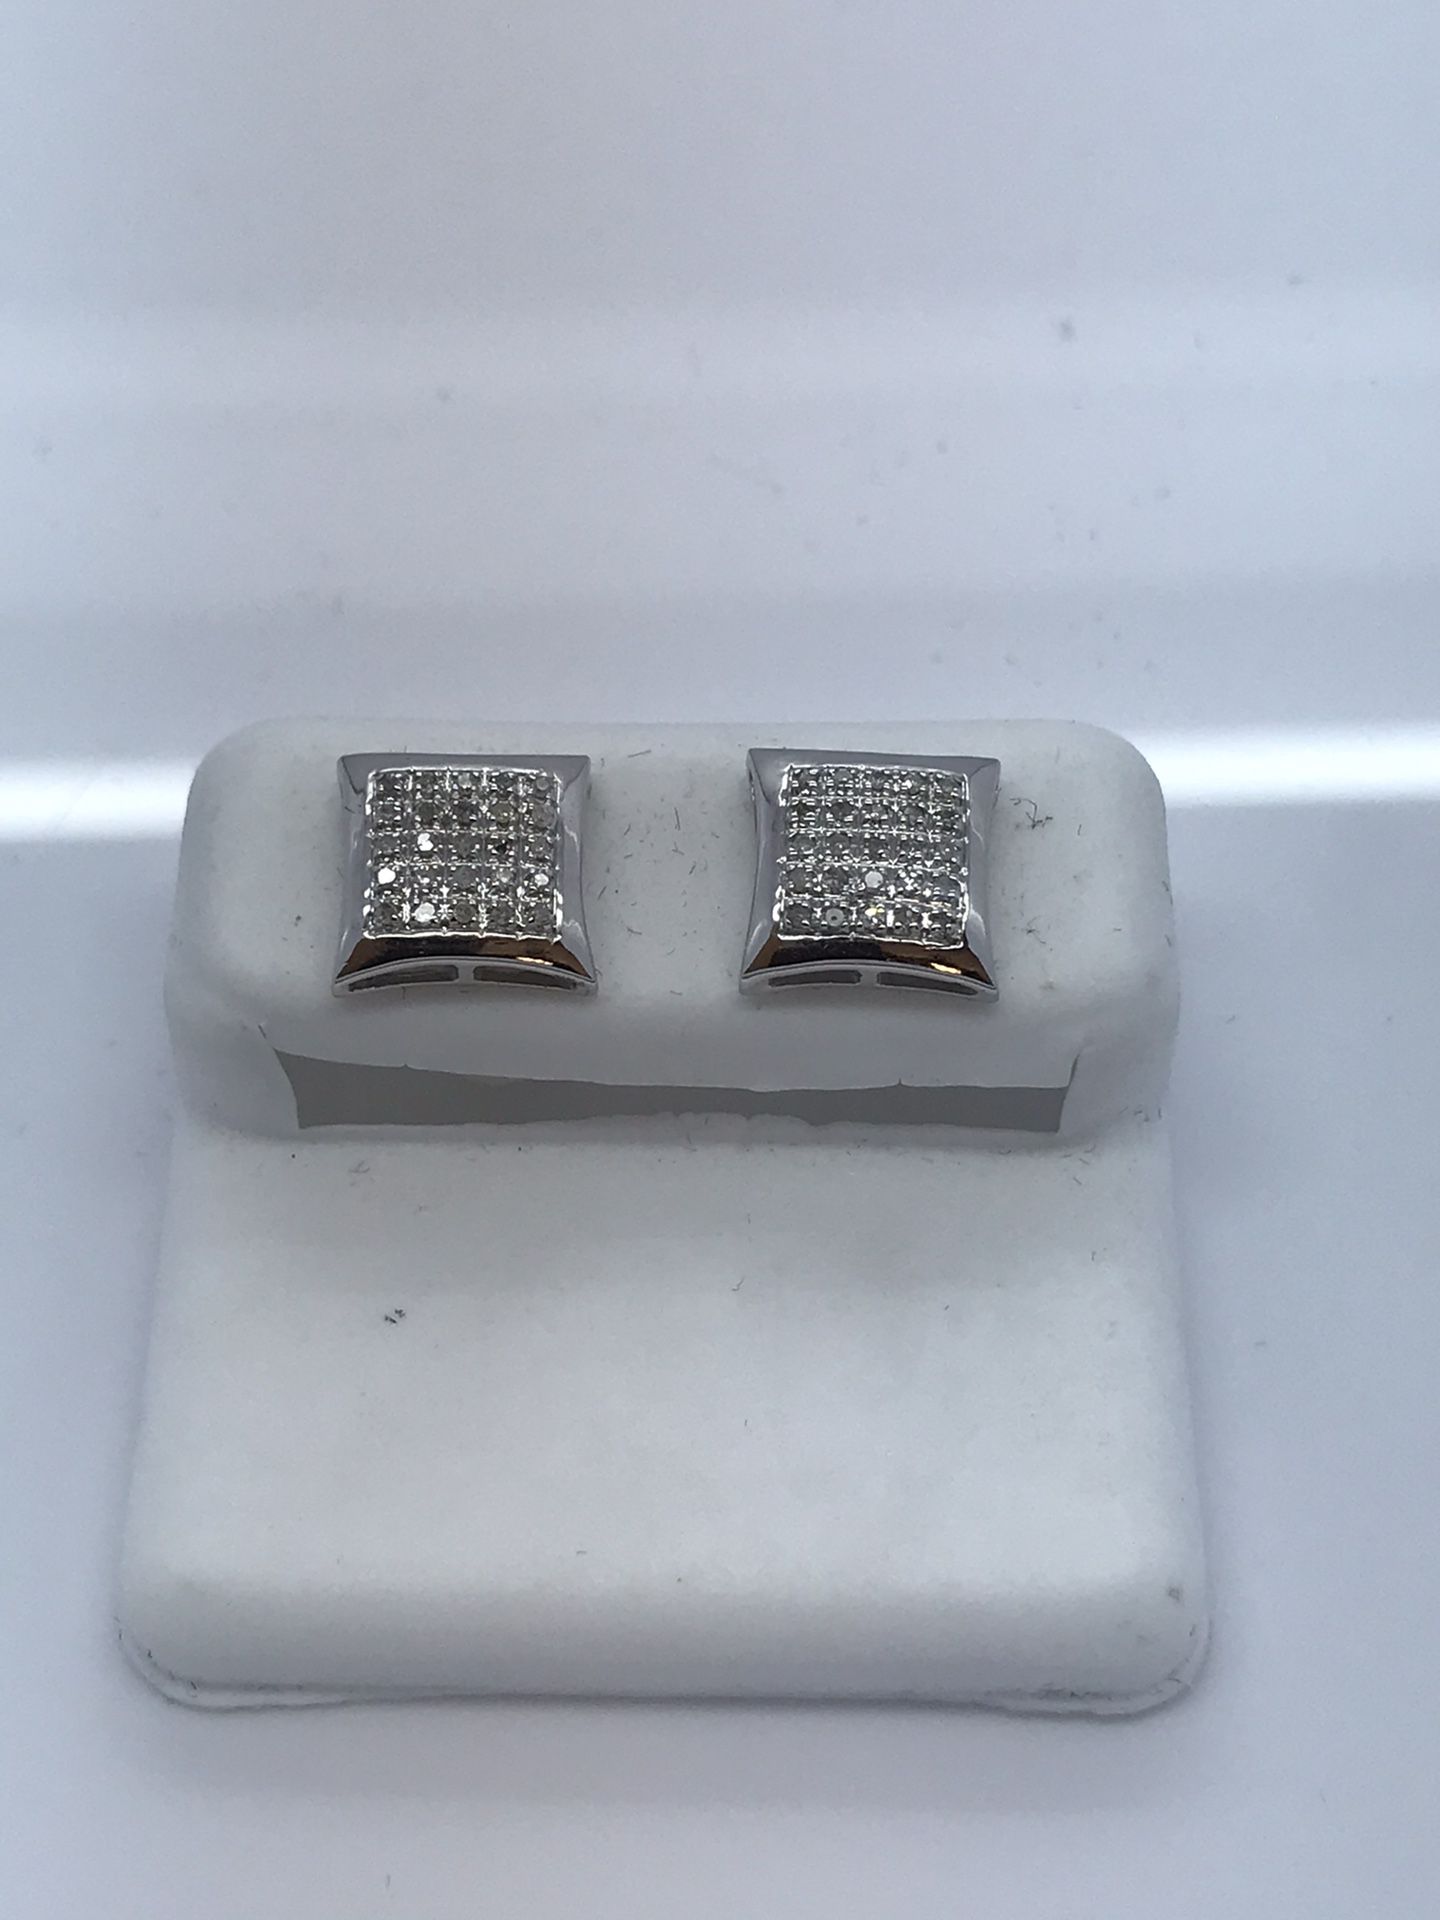 10k white gold earrings with .15 carat diamonds